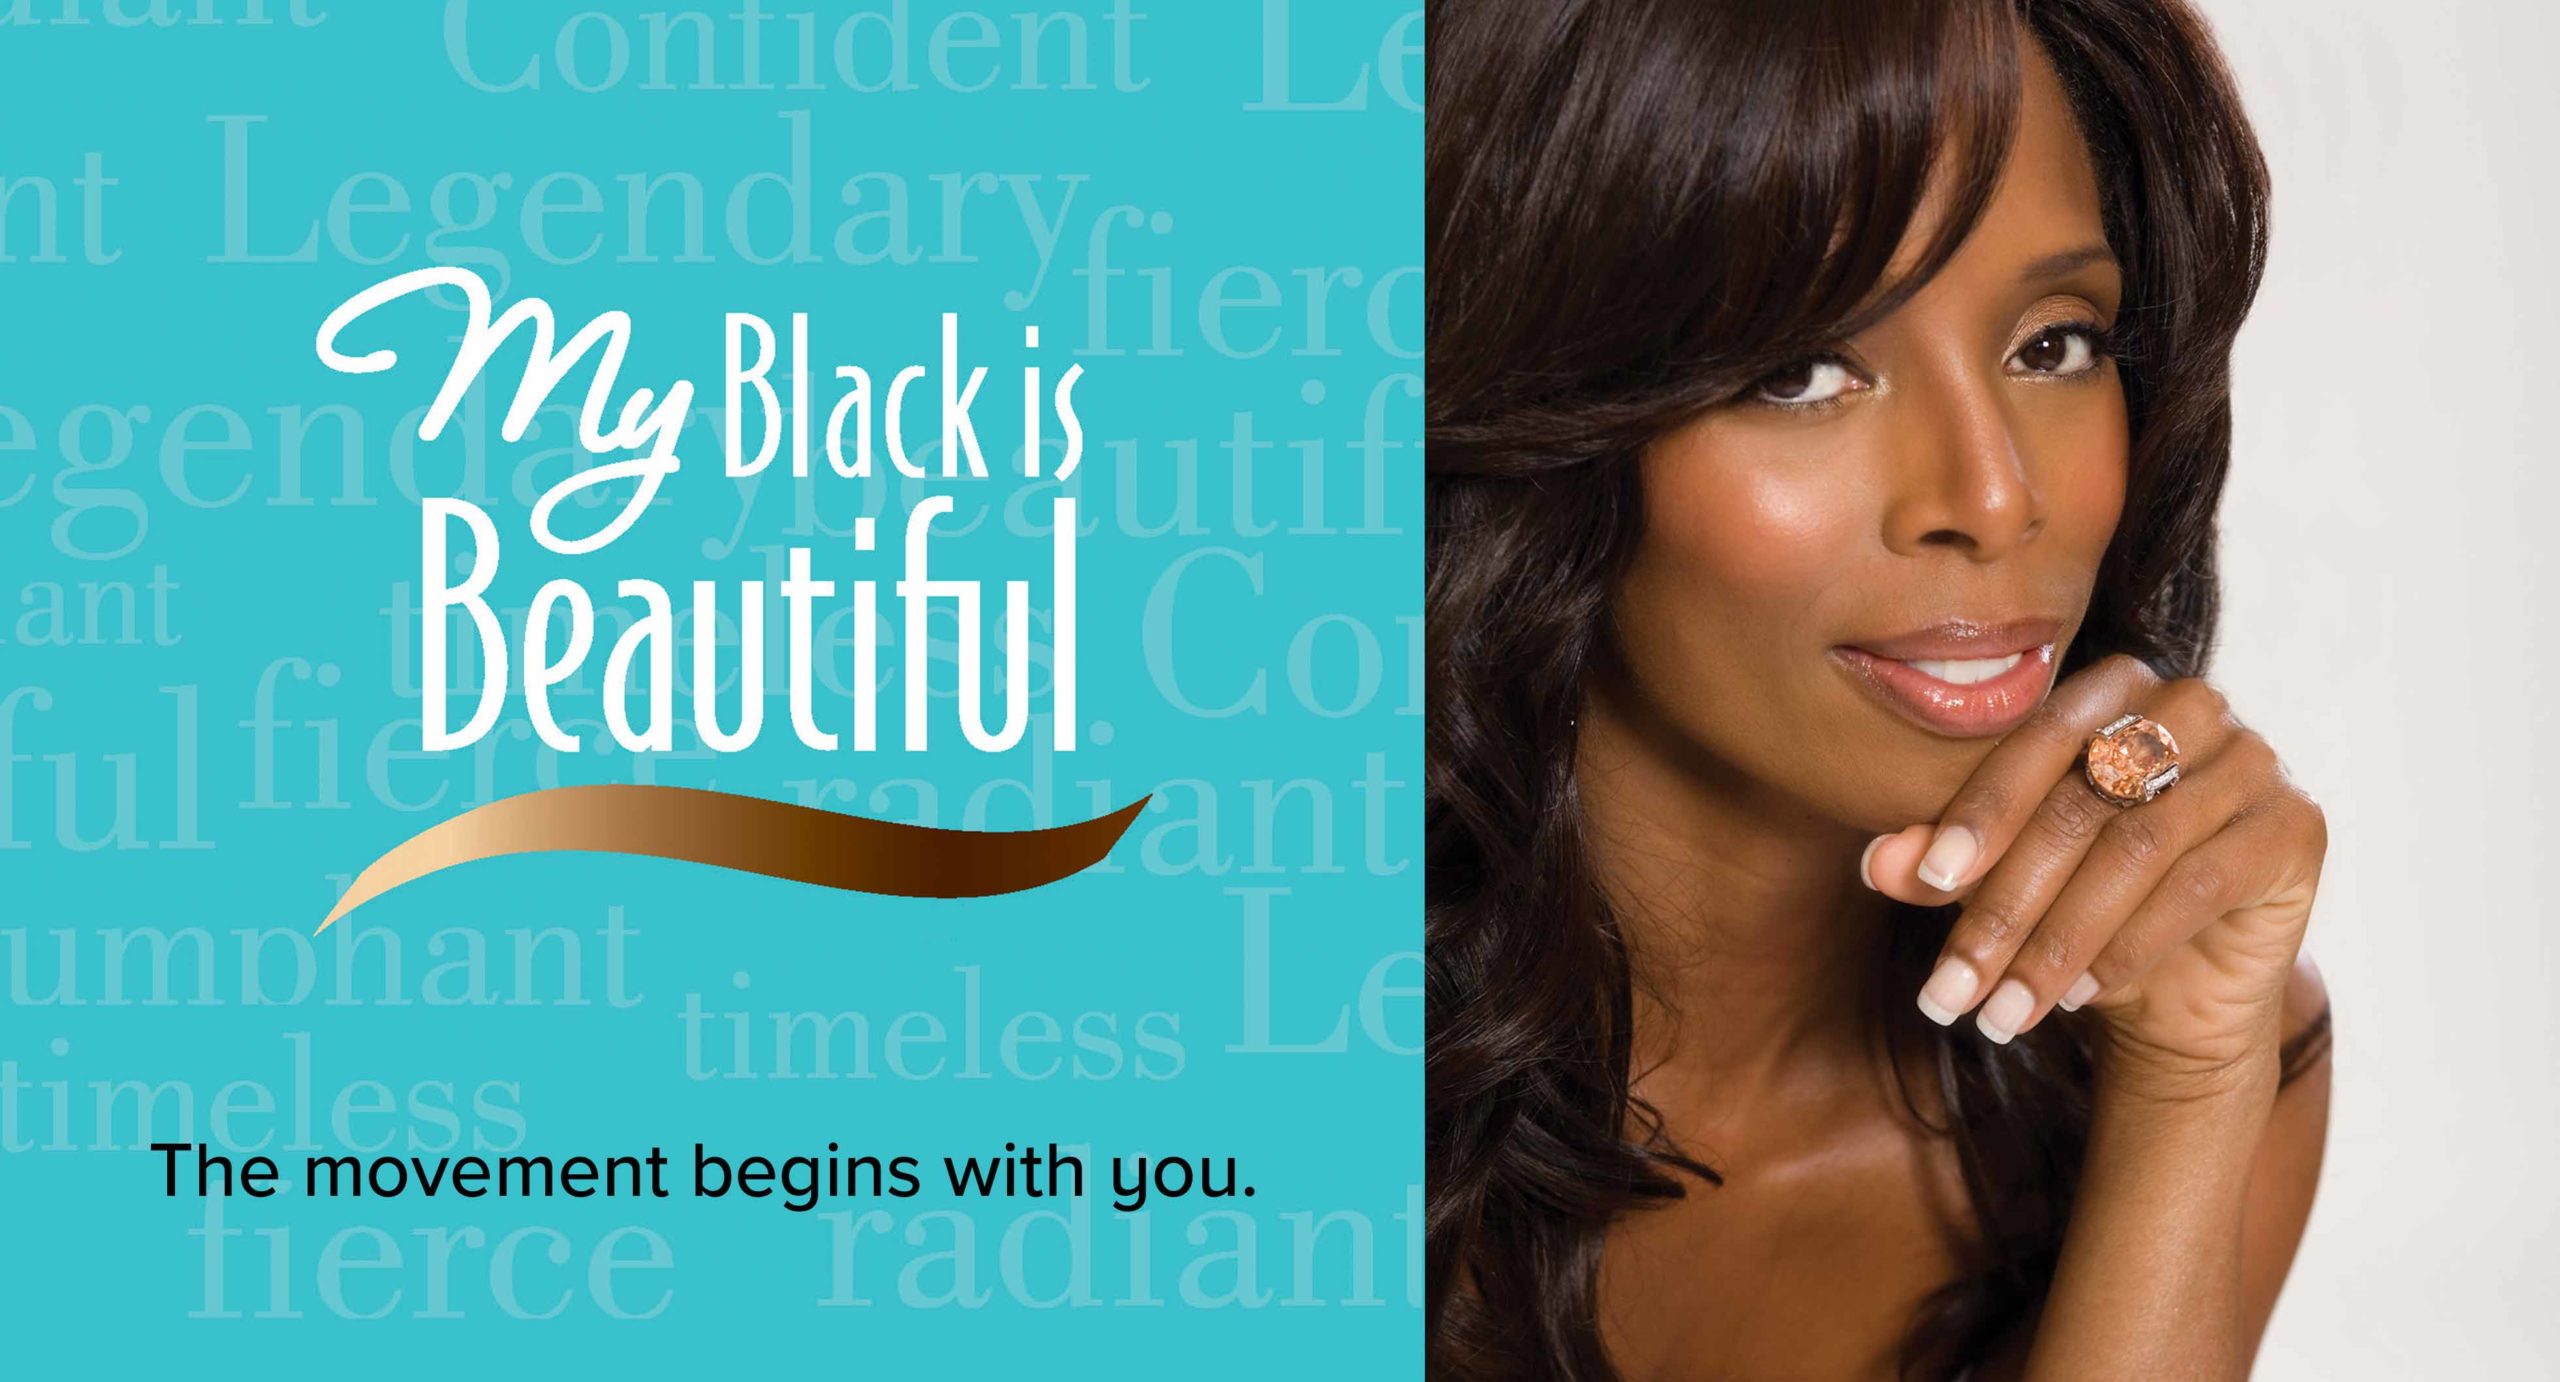 My Black Is Beautiful campaign for AA audience